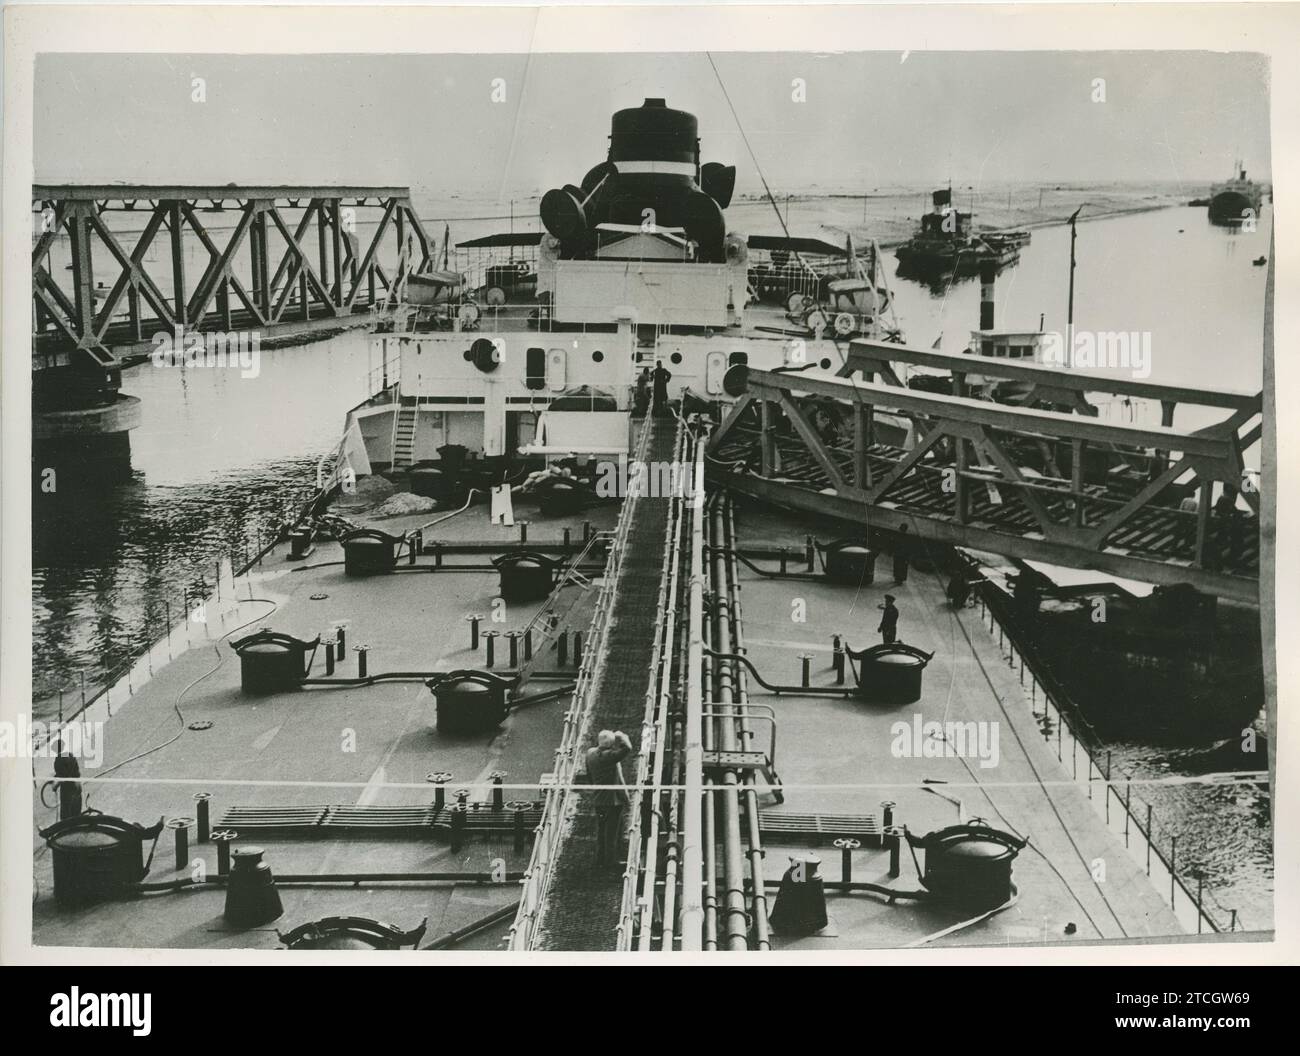 Suez Canal, Egypt, 01/02/1955. A Liberian ship crashed into a bridge nine miles north of Somalia. In the image, the deck of the World Peace ship. Credit: Album / Archivo ABC Stock Photo